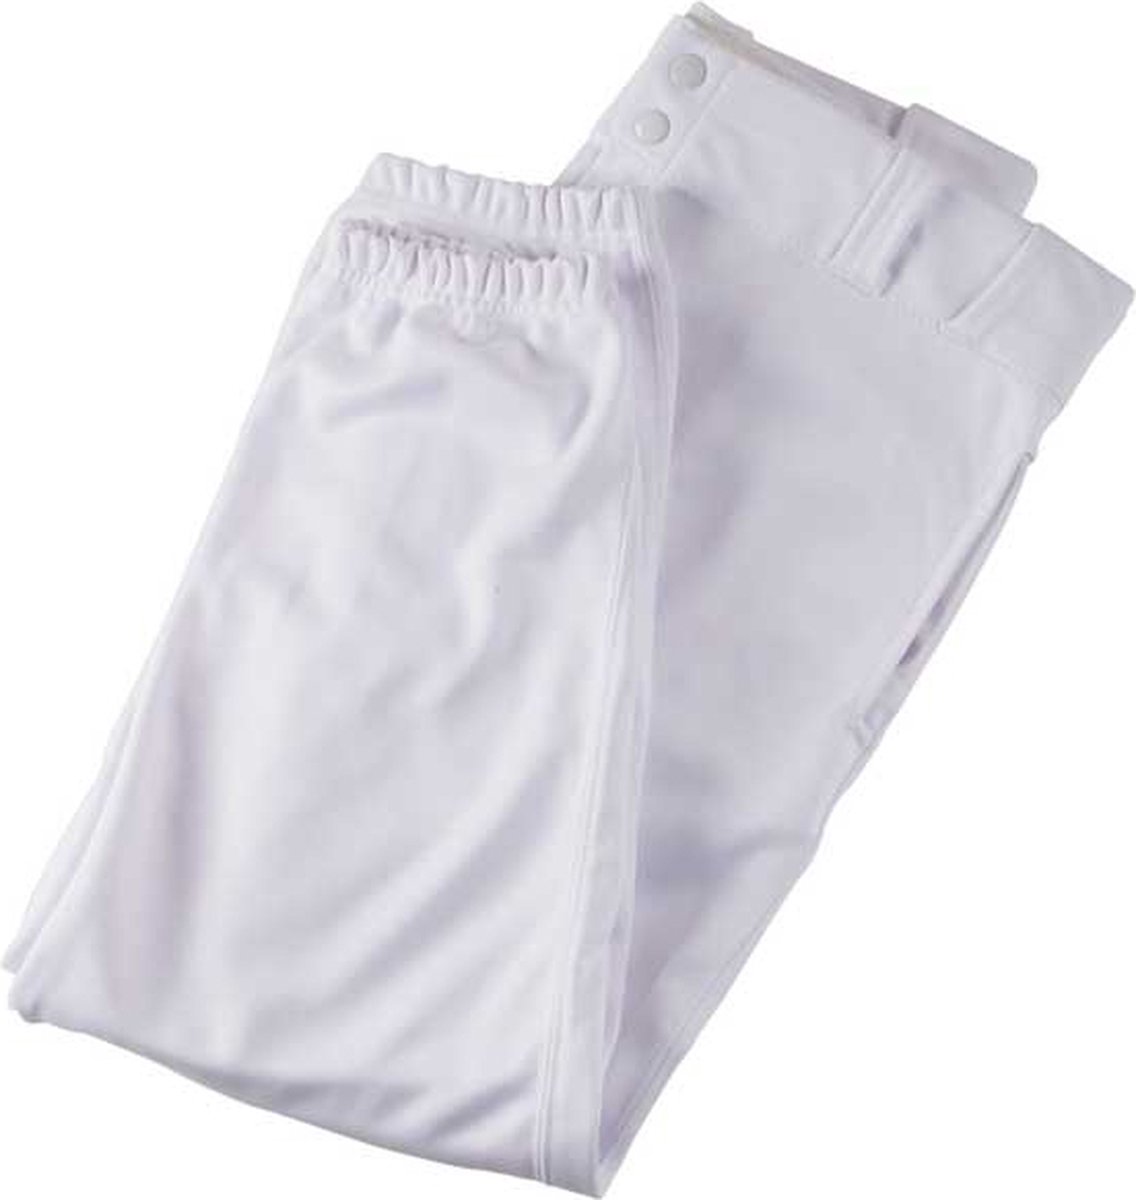 Smitty Official's Knickers 36 White